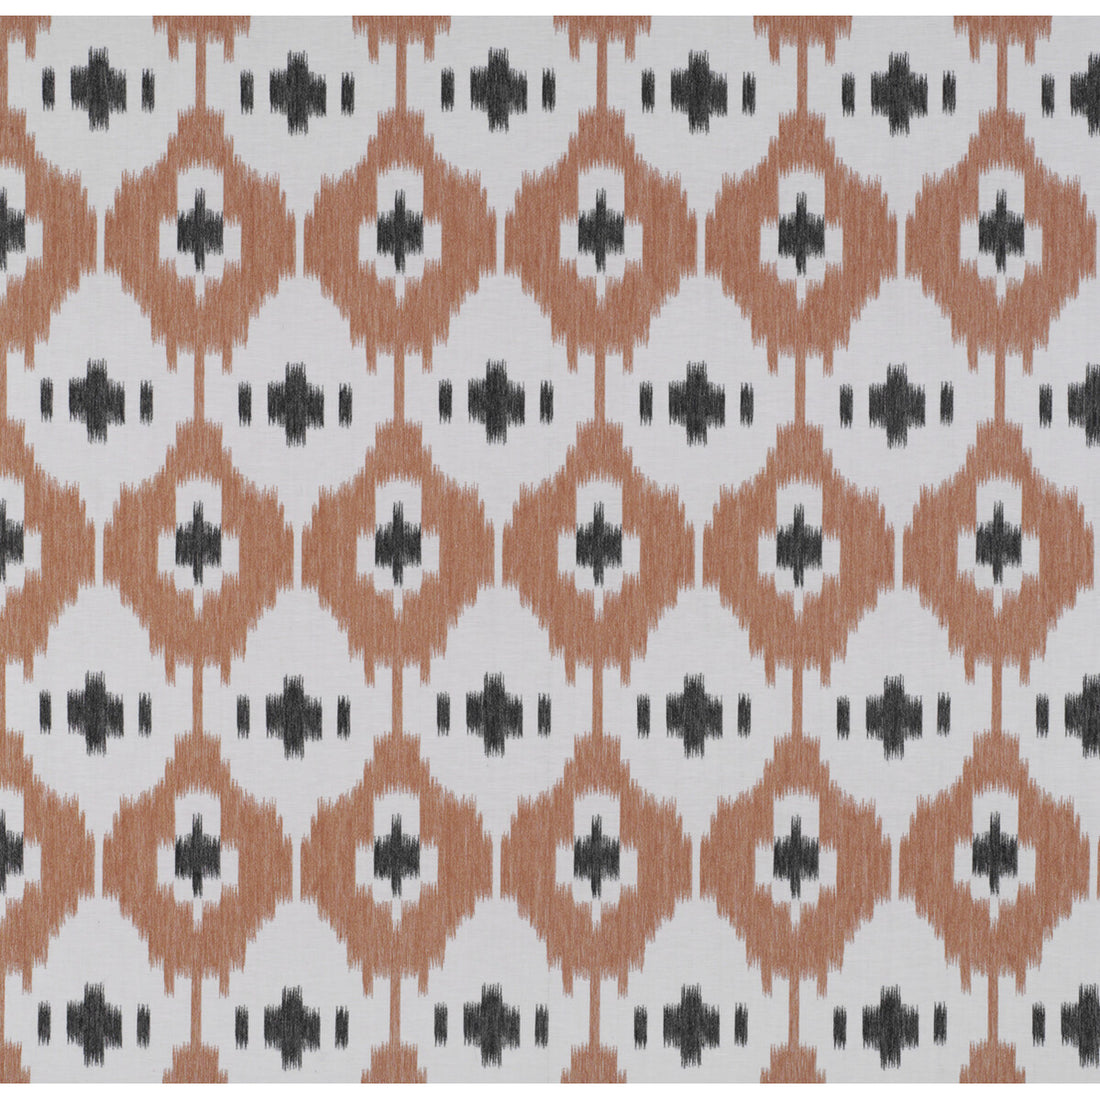 Panarea fabric in ladrillo/onyx color - pattern GDT5315.005.0 - by Gaston y Daniela in the Tierras collection